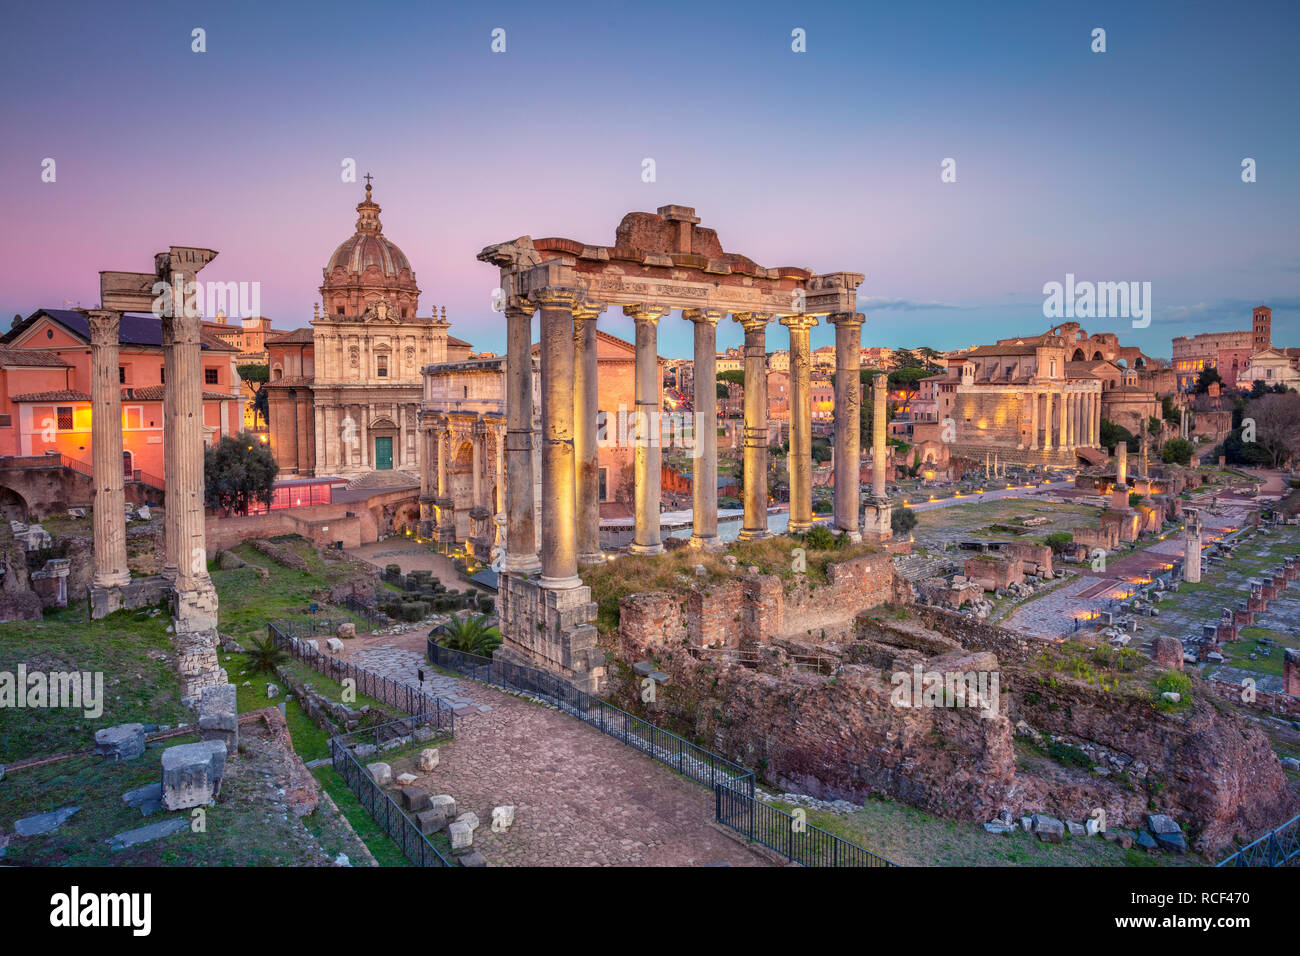 Roman Forum, Rome. Cityscape image of famous ancient Roman Forum in Rome, Italy during sunset Stock Photo